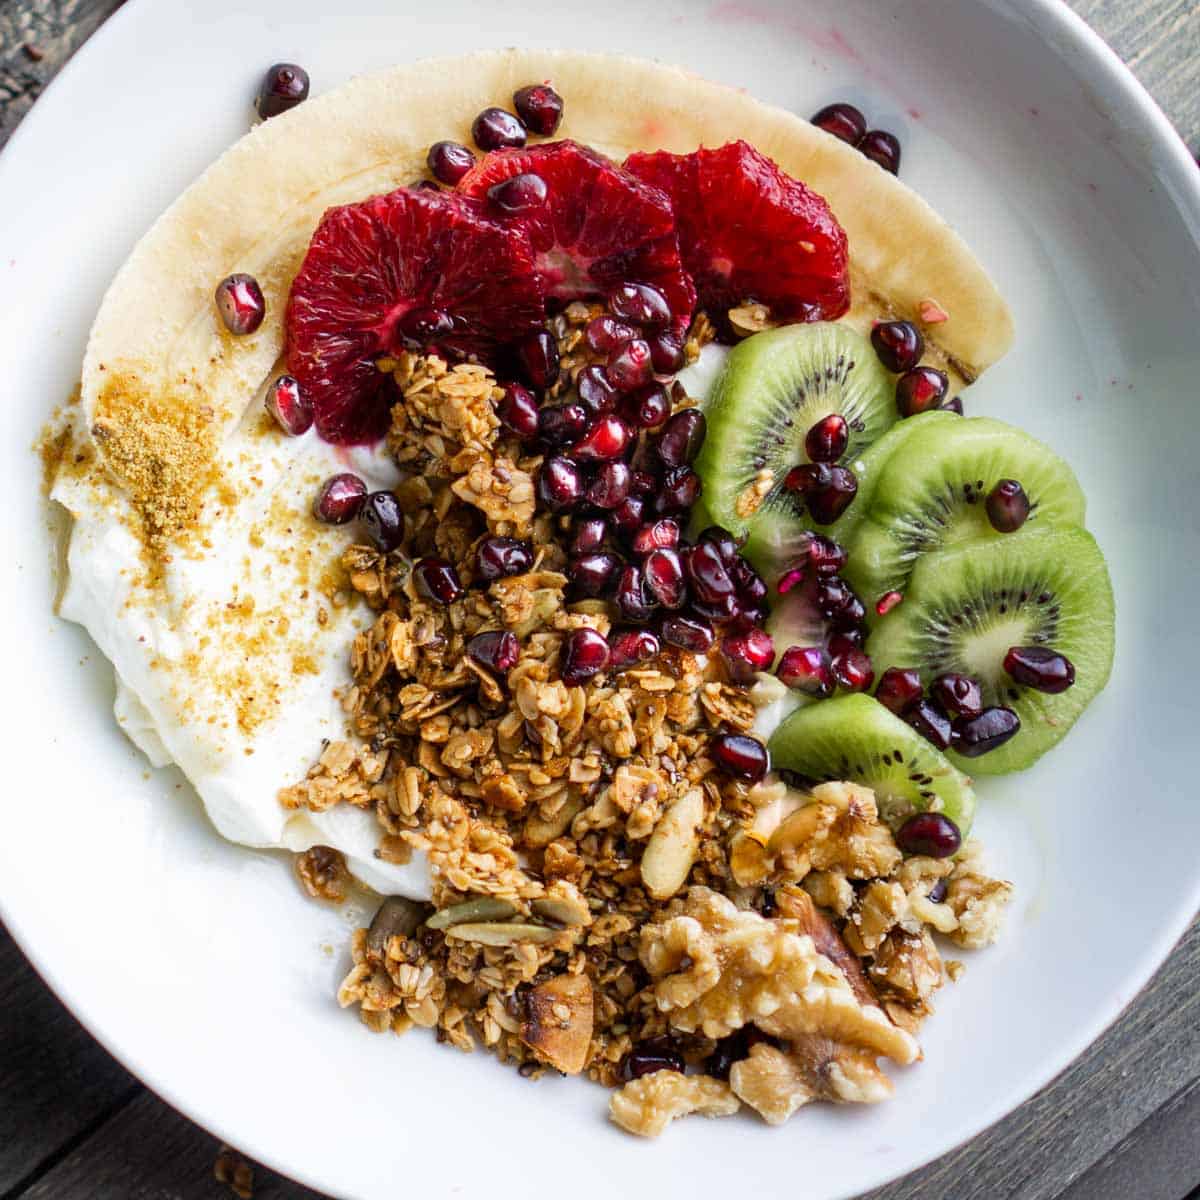 Yogurt with Granola Bowl with Fruit - The Kitchen Girl